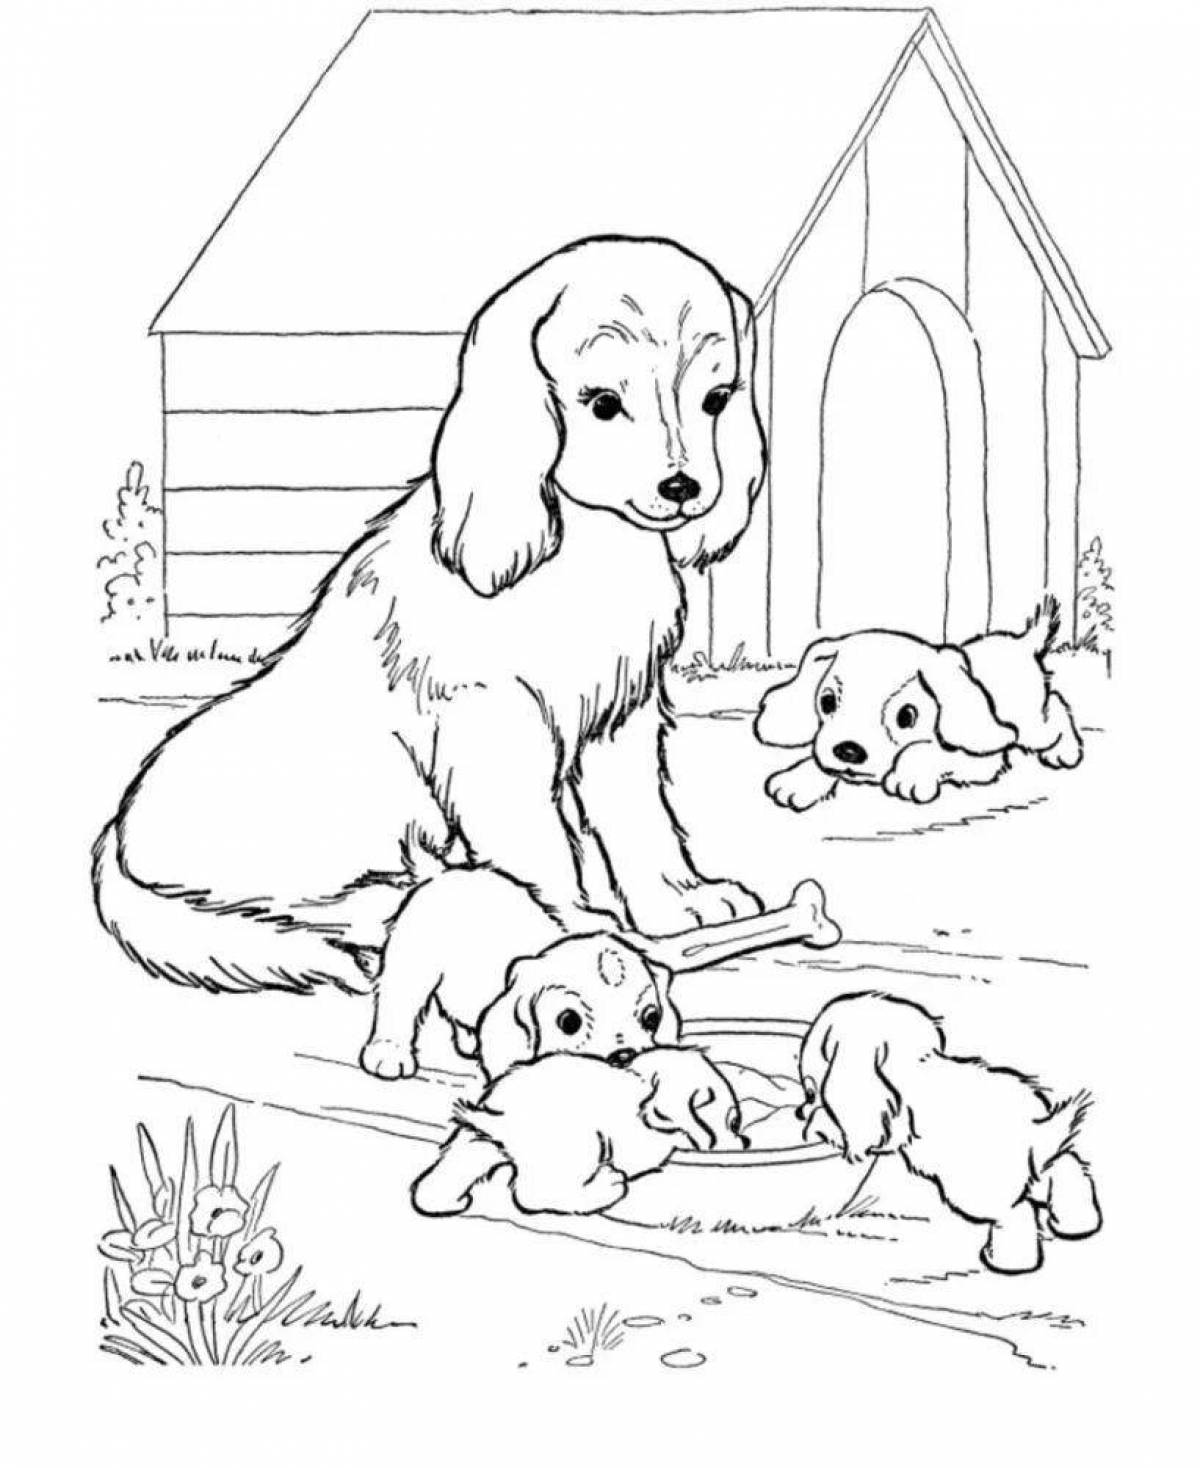 Amazing dog coloring book for kids 6-7 years old